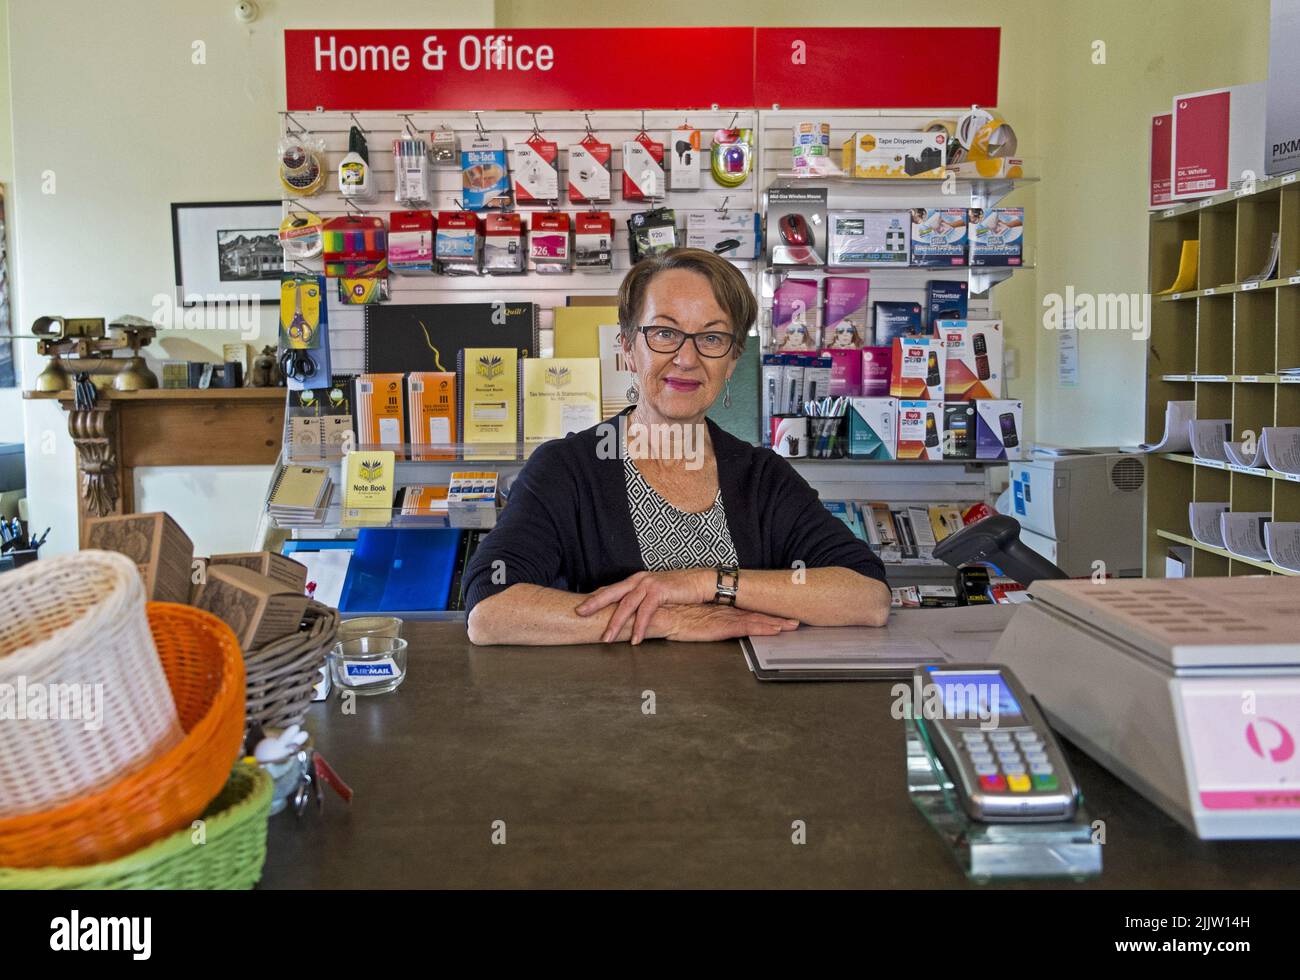 Clare Ryan, postmistress/postmaster of the small country post office in Balmoral in Western Victoria. Clare is a lifestyle changer who left a busy career in Sydney to find a quiter life in the country. She is an active member of her rural community. Stock Photo